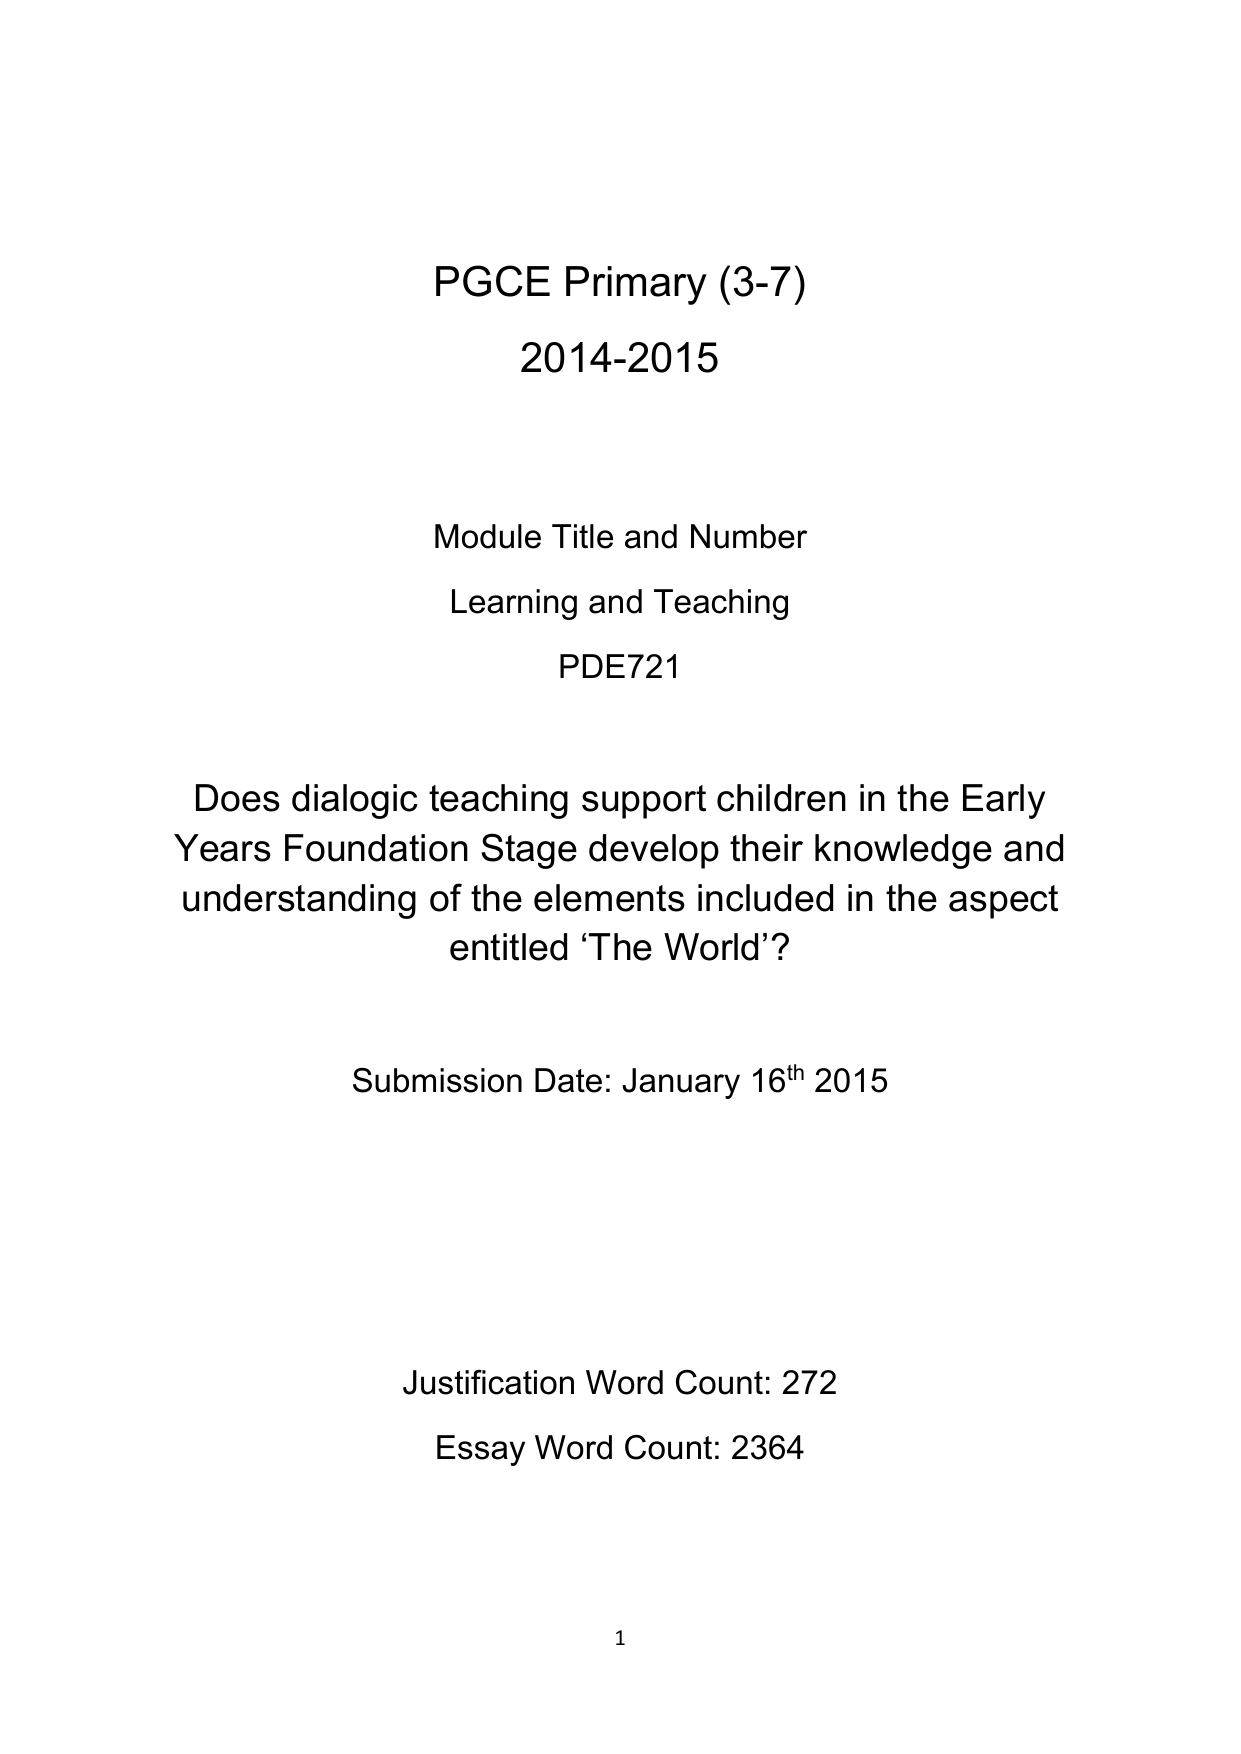 pgce essays examples